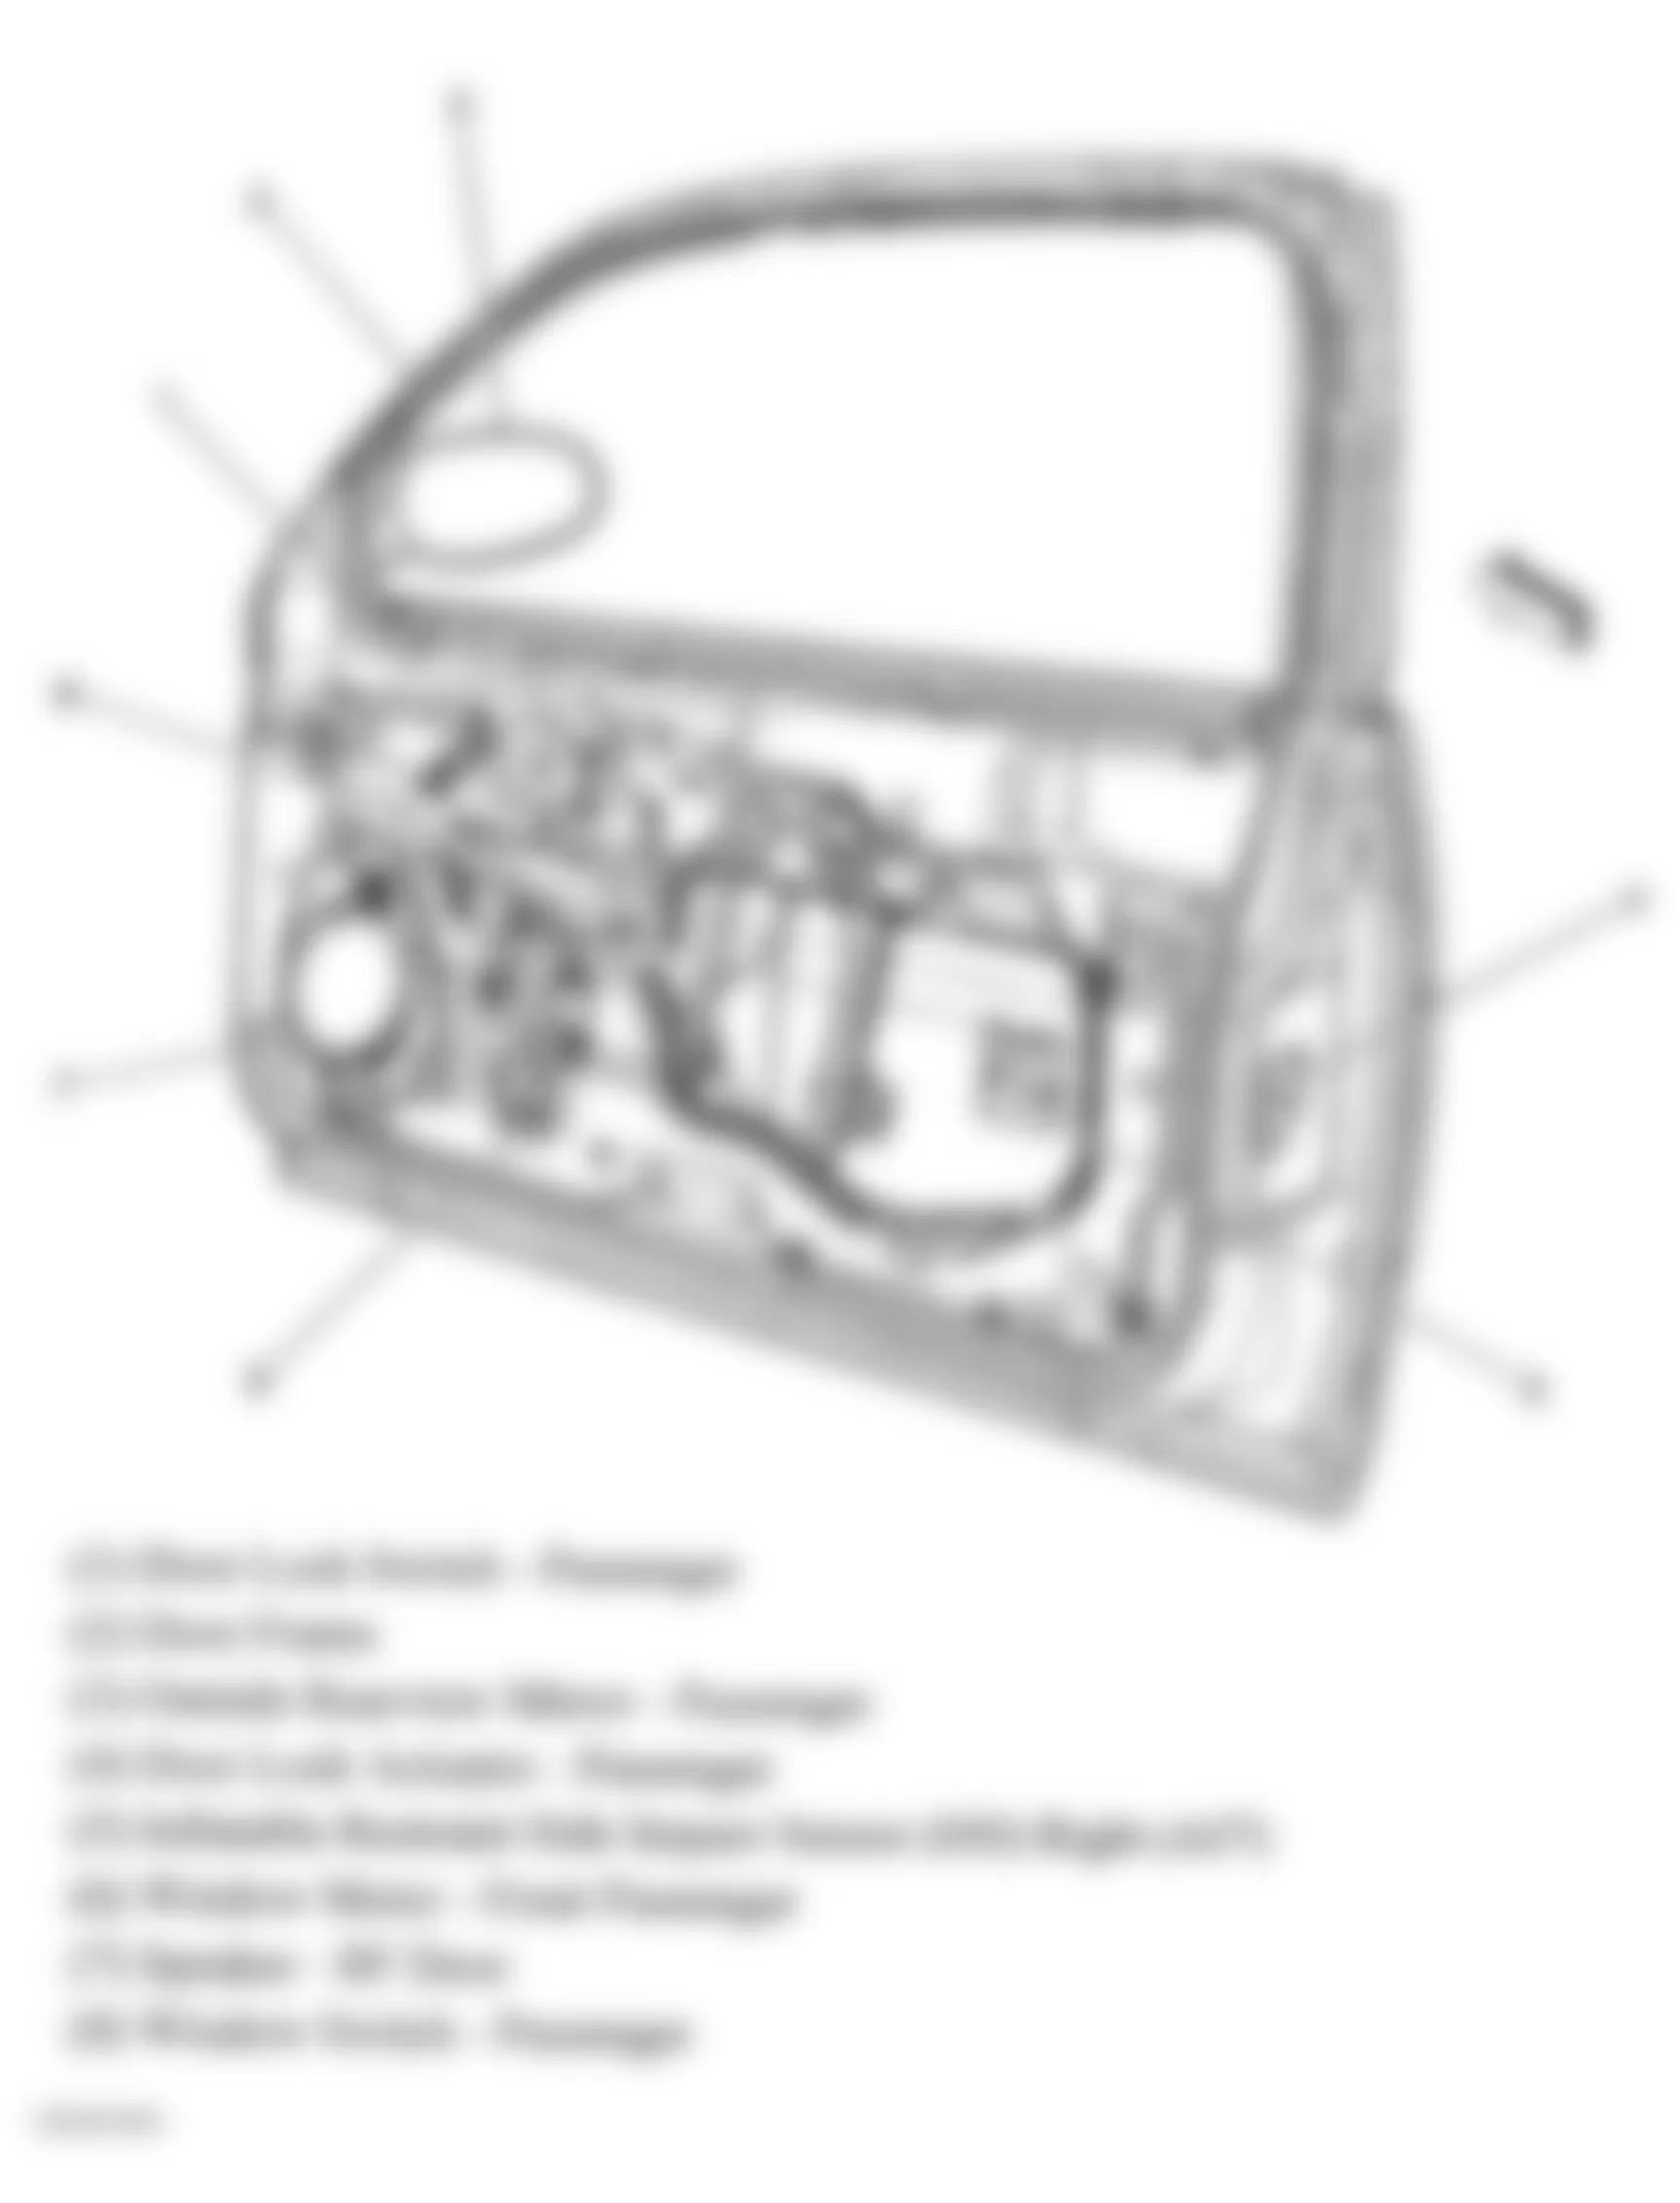 Chevrolet Impala SS 2006 - Component Locations -  Right Front Door Components (Coupe)